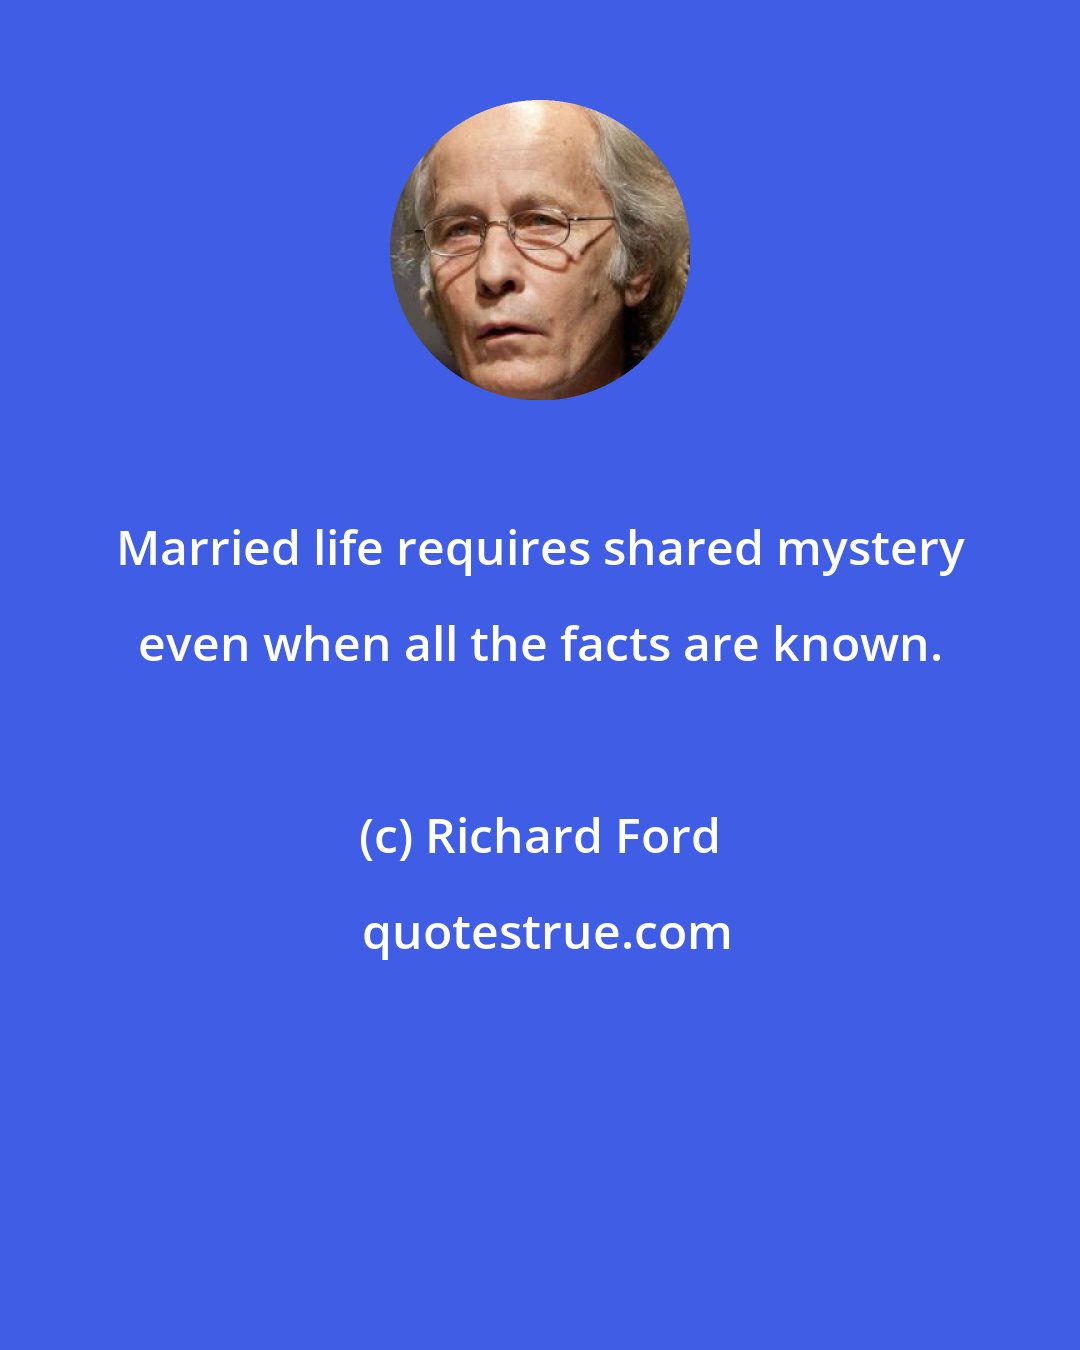 Richard Ford: Married life requires shared mystery even when all the facts are known.